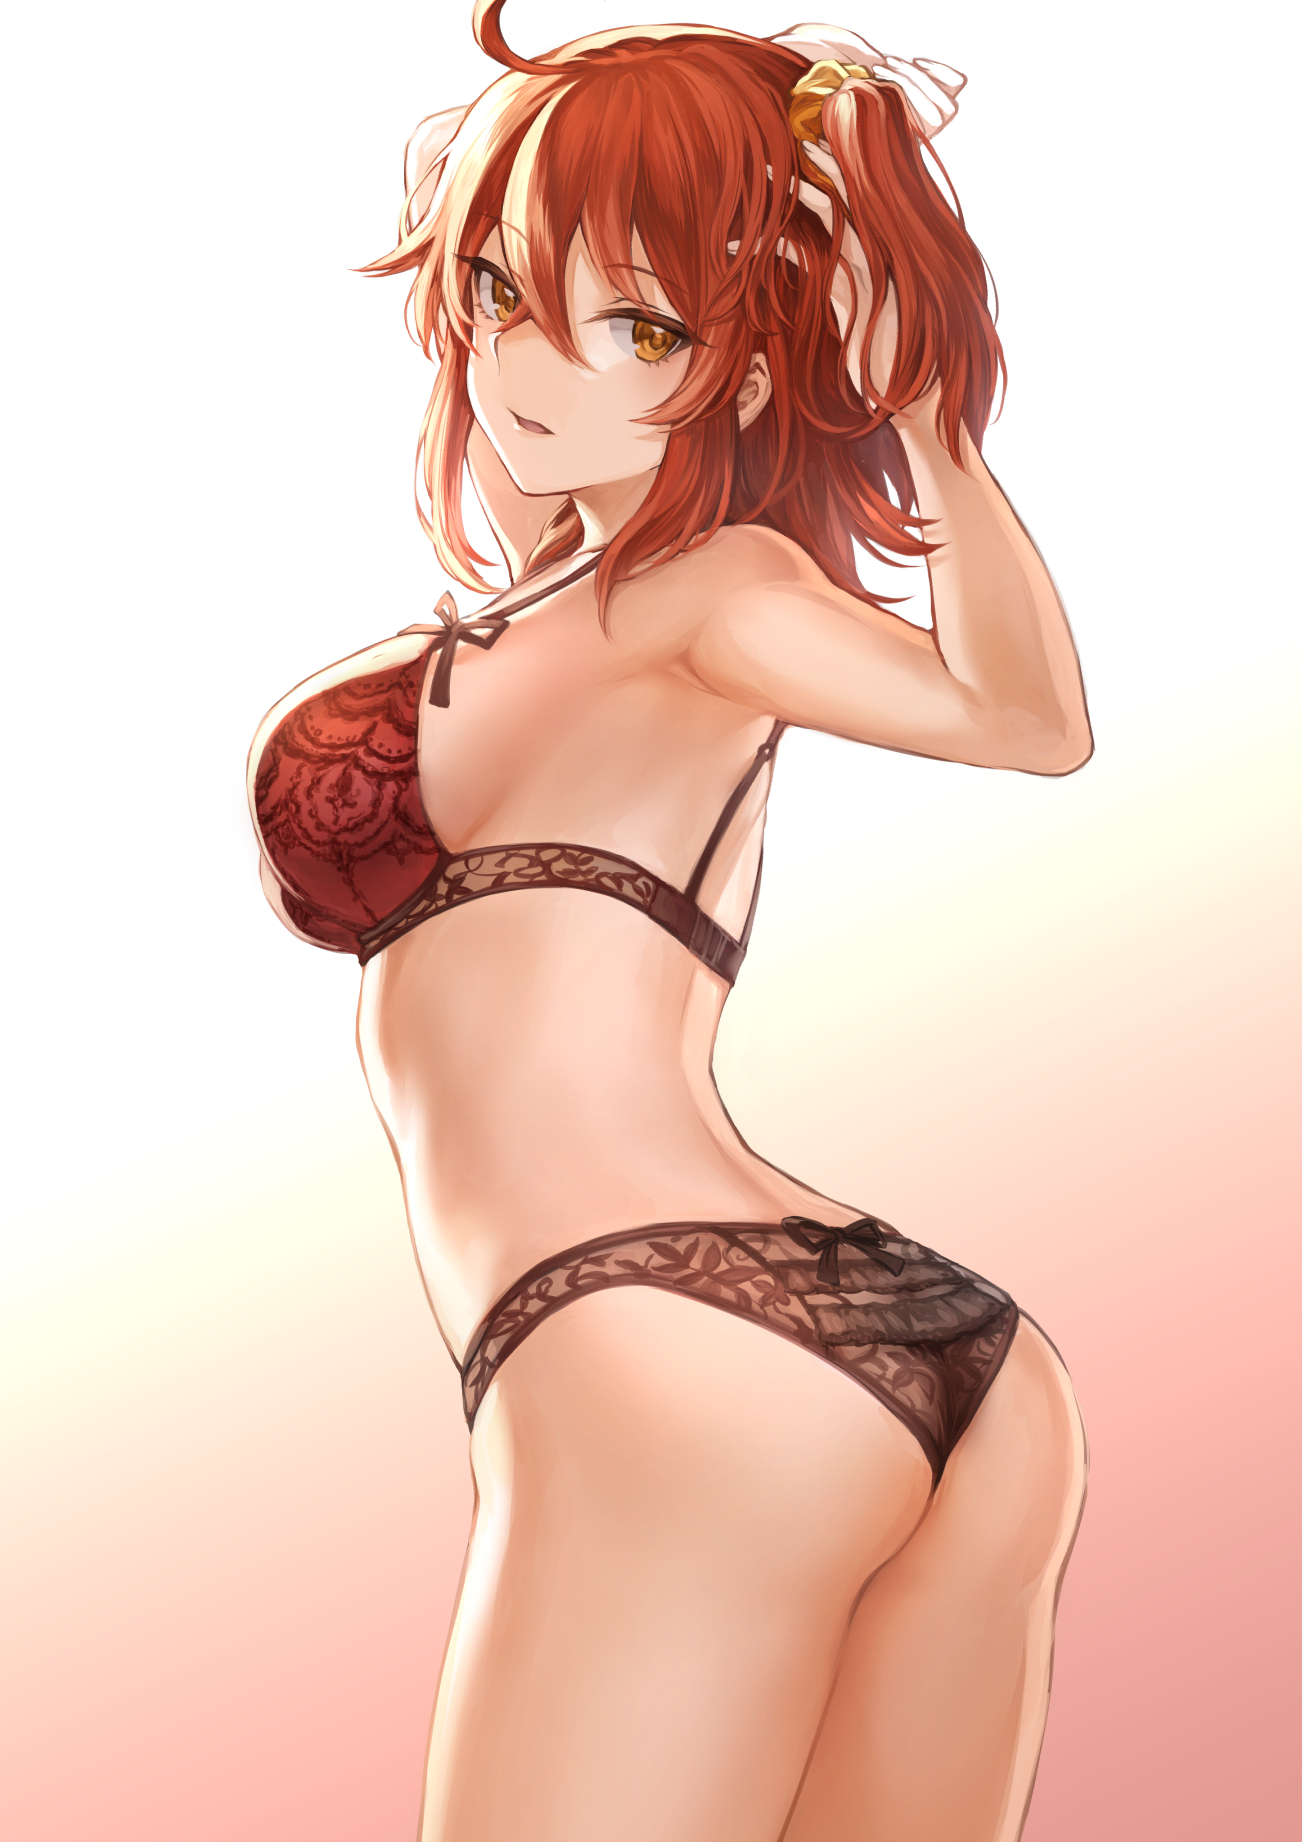 Anime 1302x1842 anime anime girls digital art artwork portrait display big boobs Fate/Grand Order Fujimaru Ritsuka redhead red bra black panties open mouth yellow eyes arms up ponytail ass Mashu 003 Fate series sideboob thighs black lace parted lips touching hair arched back 2D short hair ahoge looking at viewer gradient fan art ecchi